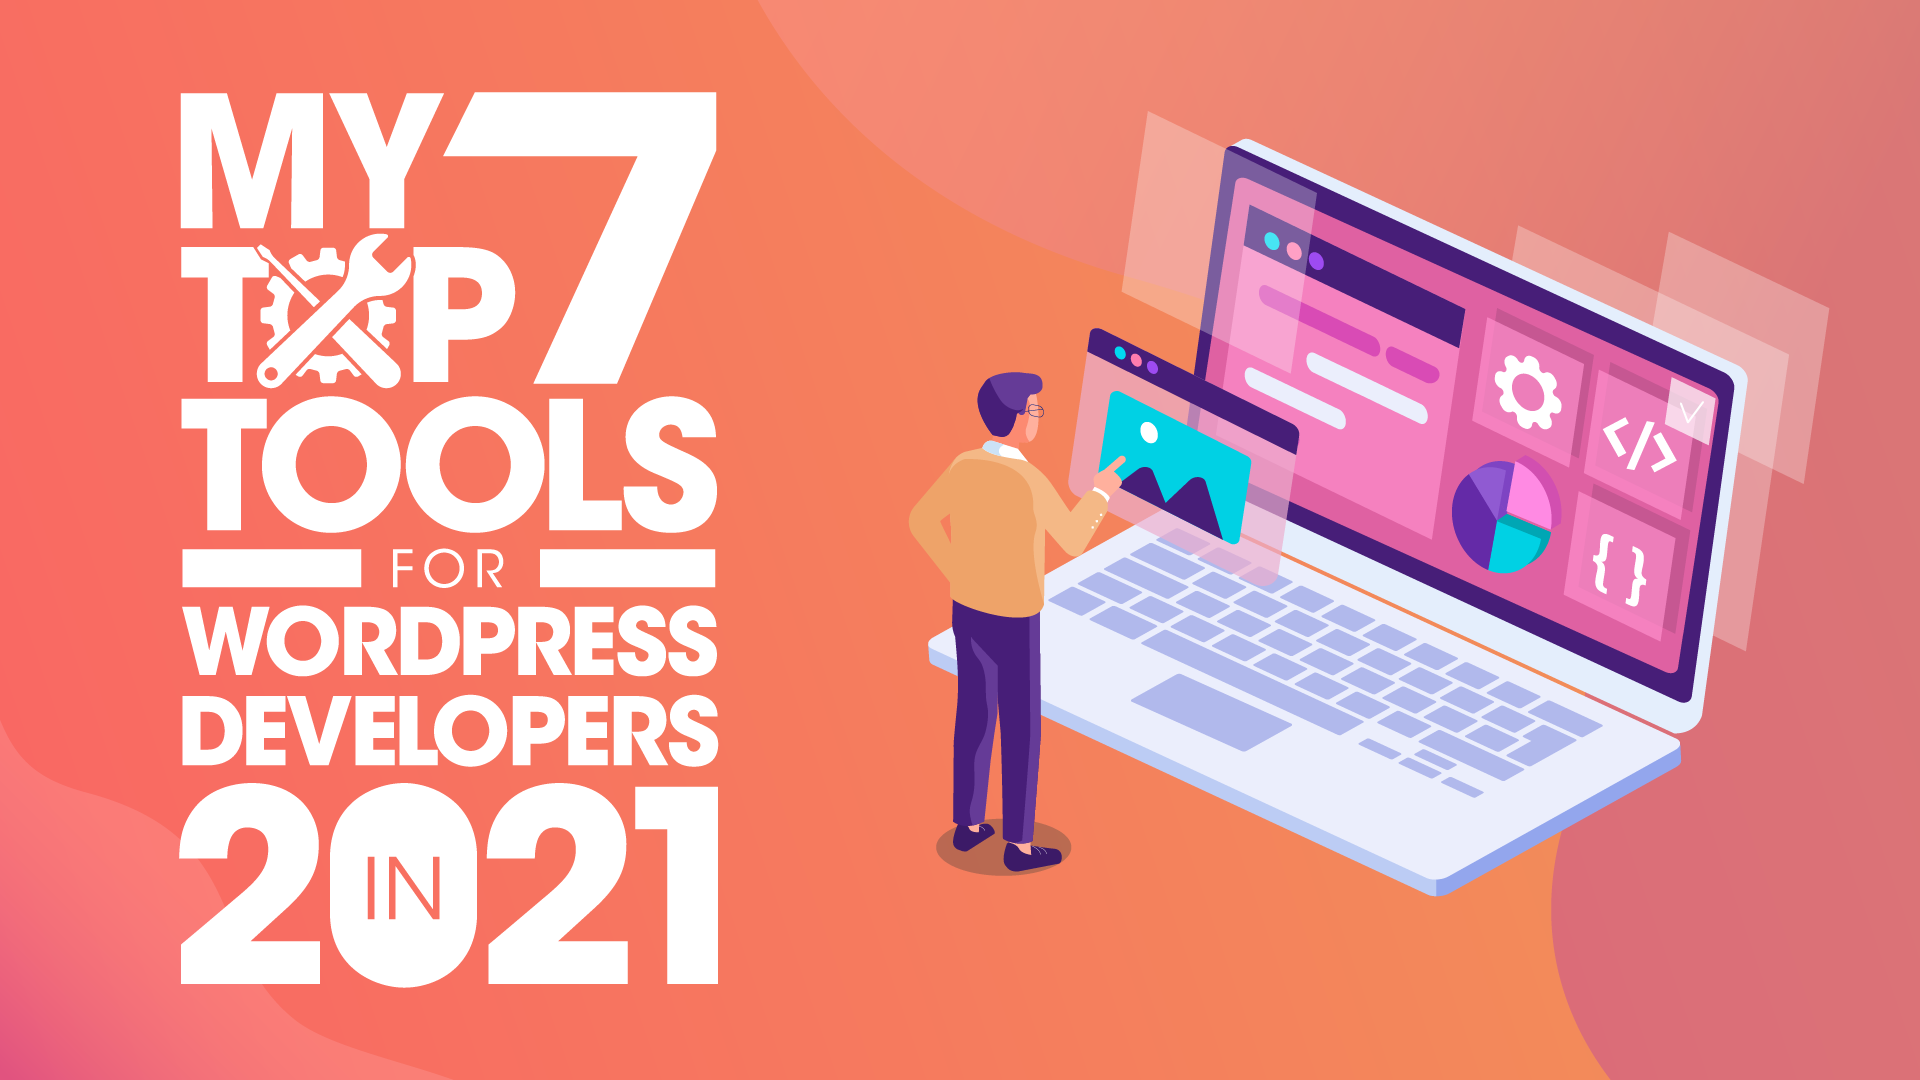 My Top 7 Tools for WordPress Developers